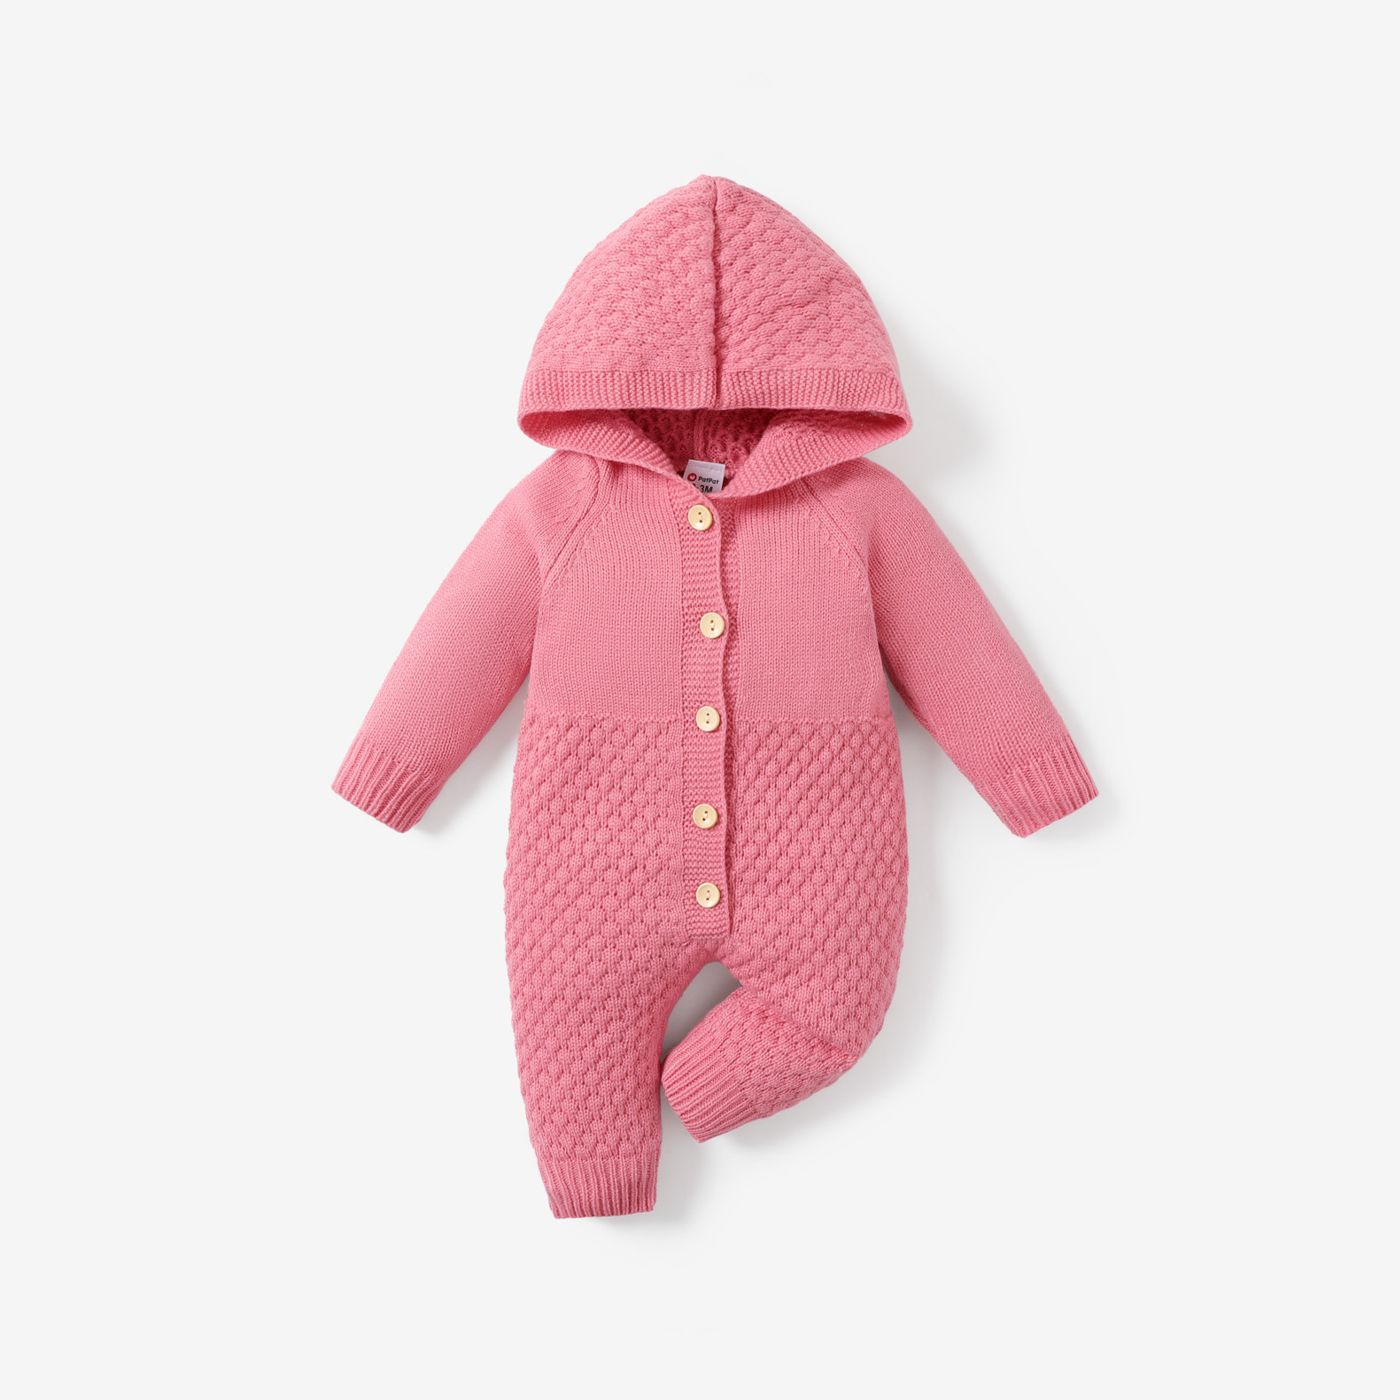 Baby Boy/Girl Solid Color Hooded Sweater Jumpsuit